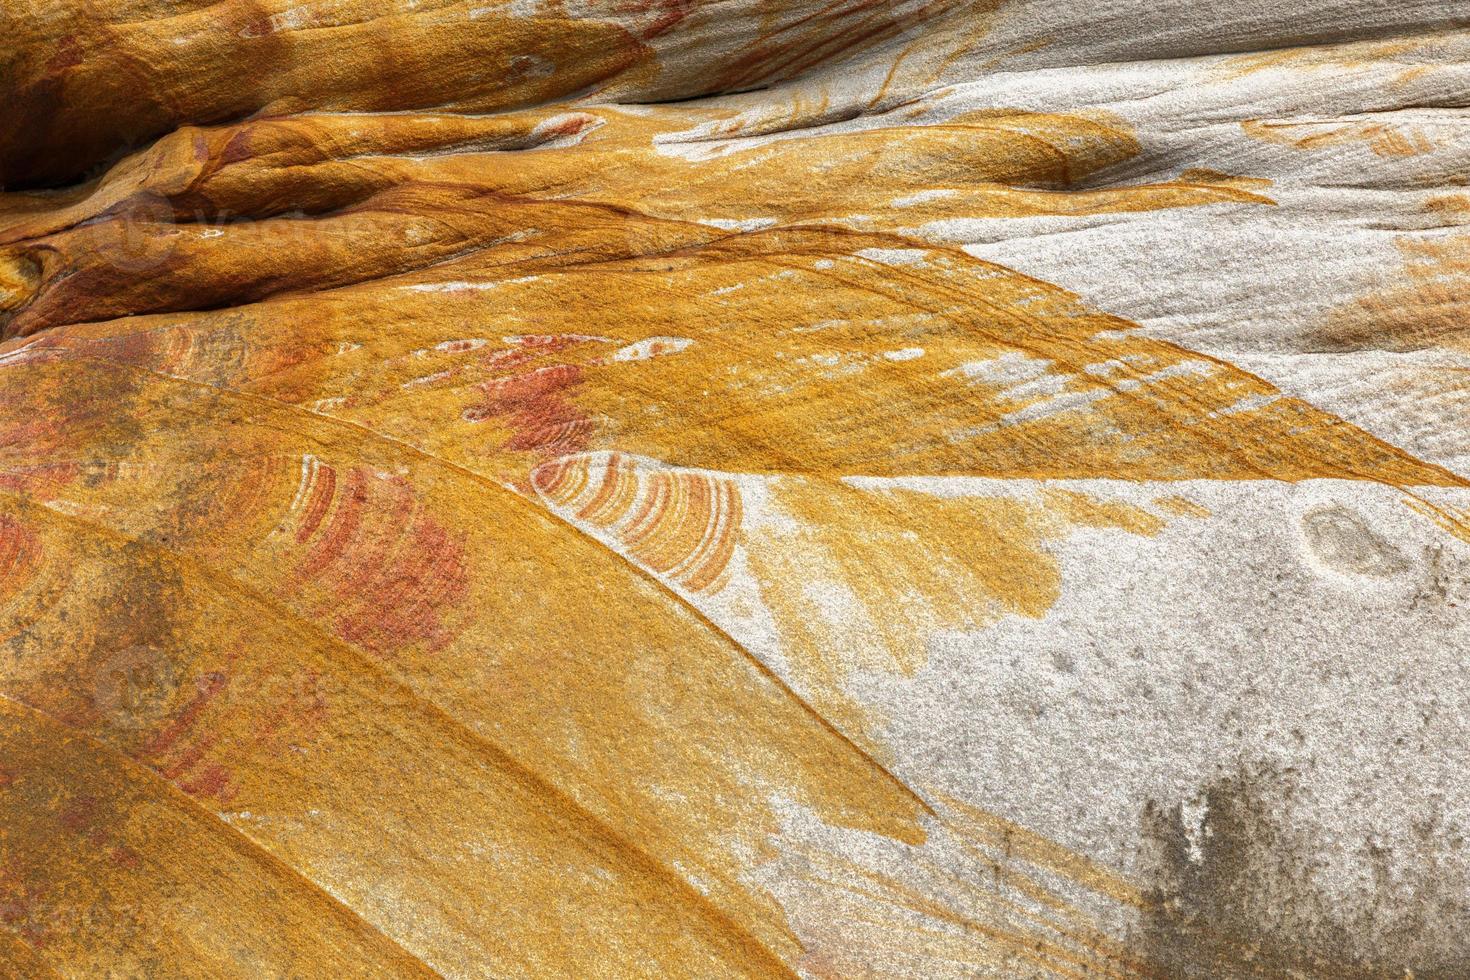 Natural stone texture, abstract pattern on a rock photo